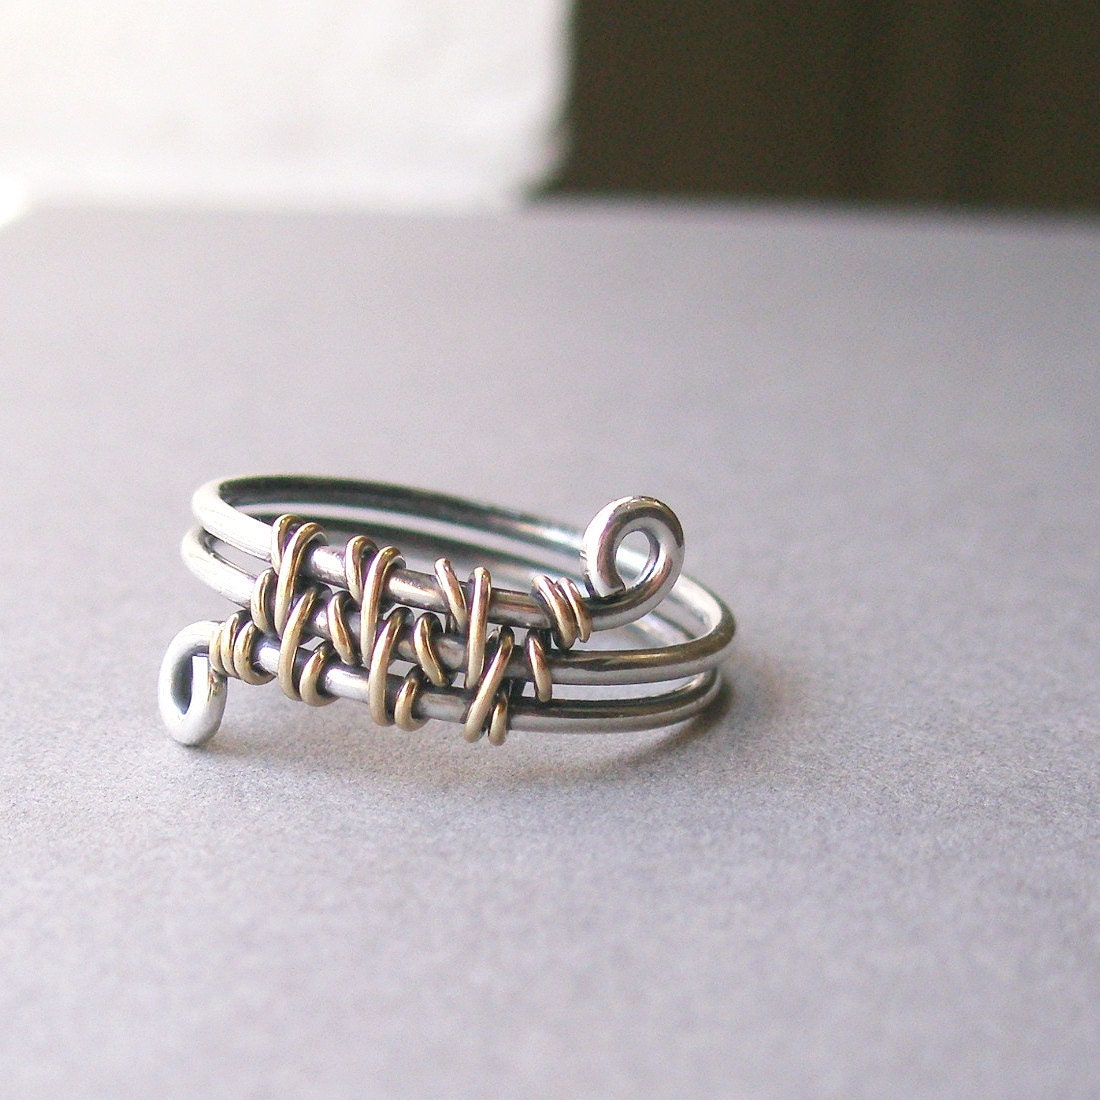 interwoven ring - (U.S. size 9.25) - sterling silver and 12K gold fill